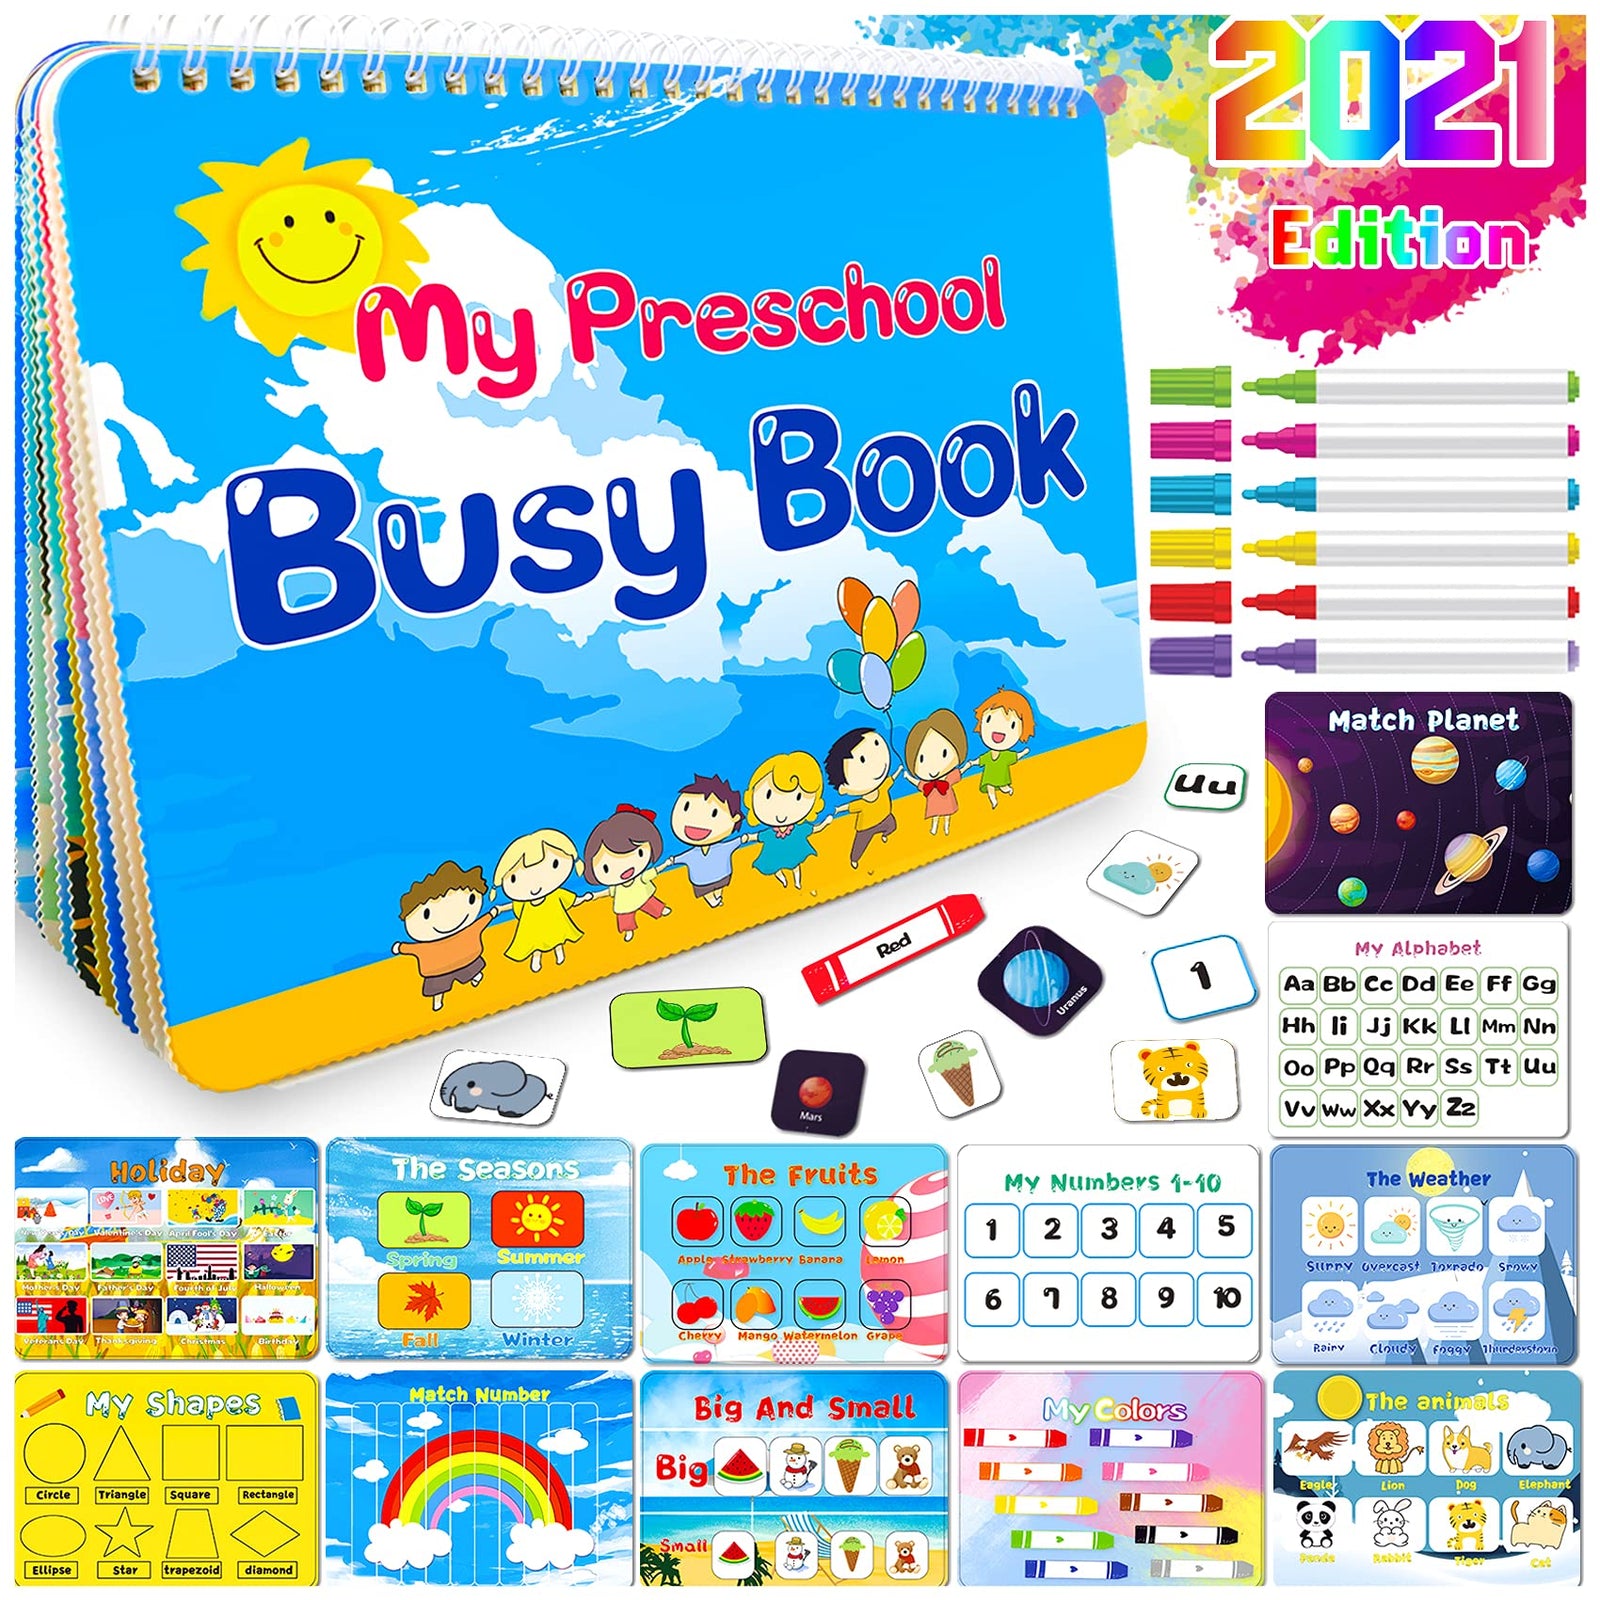 HeyKiddo Toddler Busy Book, Autism Toys for Kids, Preschool Learning Activity Binder, 16 Themes with Colorful Pages, Educational Book for Autism & Special Needs, Drawing Book for Home School Learning